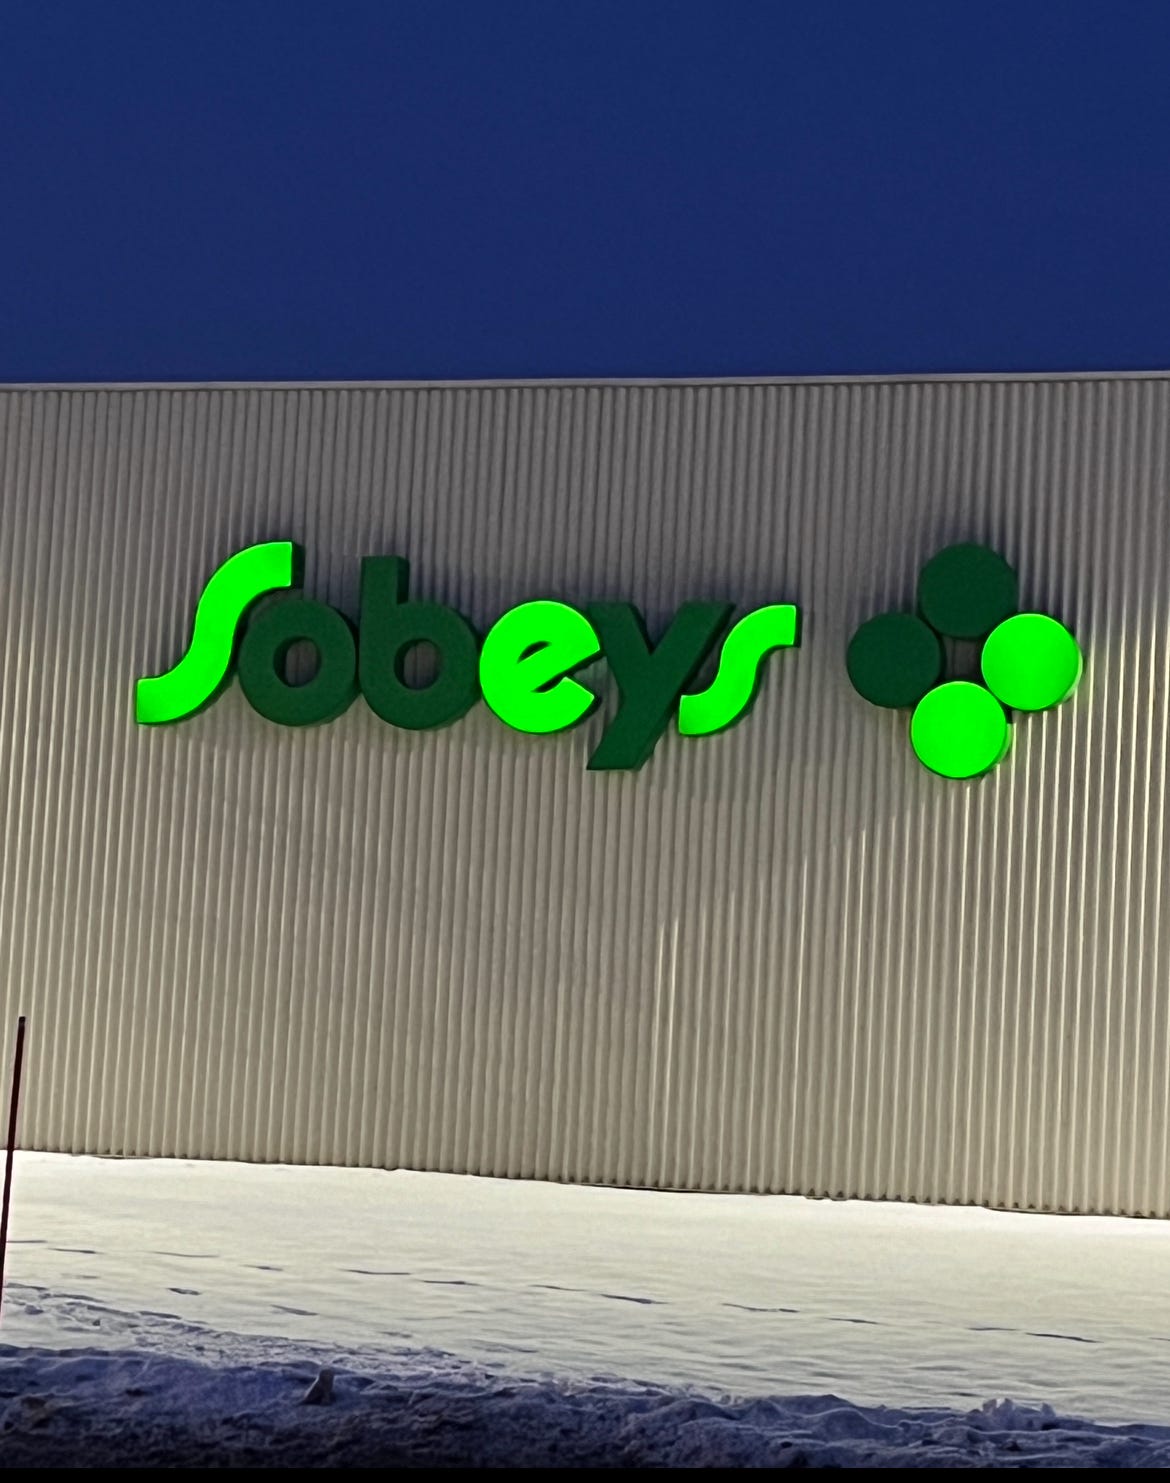 The sign on the Sobeys grocery store near my house. The letters O, B, and Y are burnt out, so it says Ses